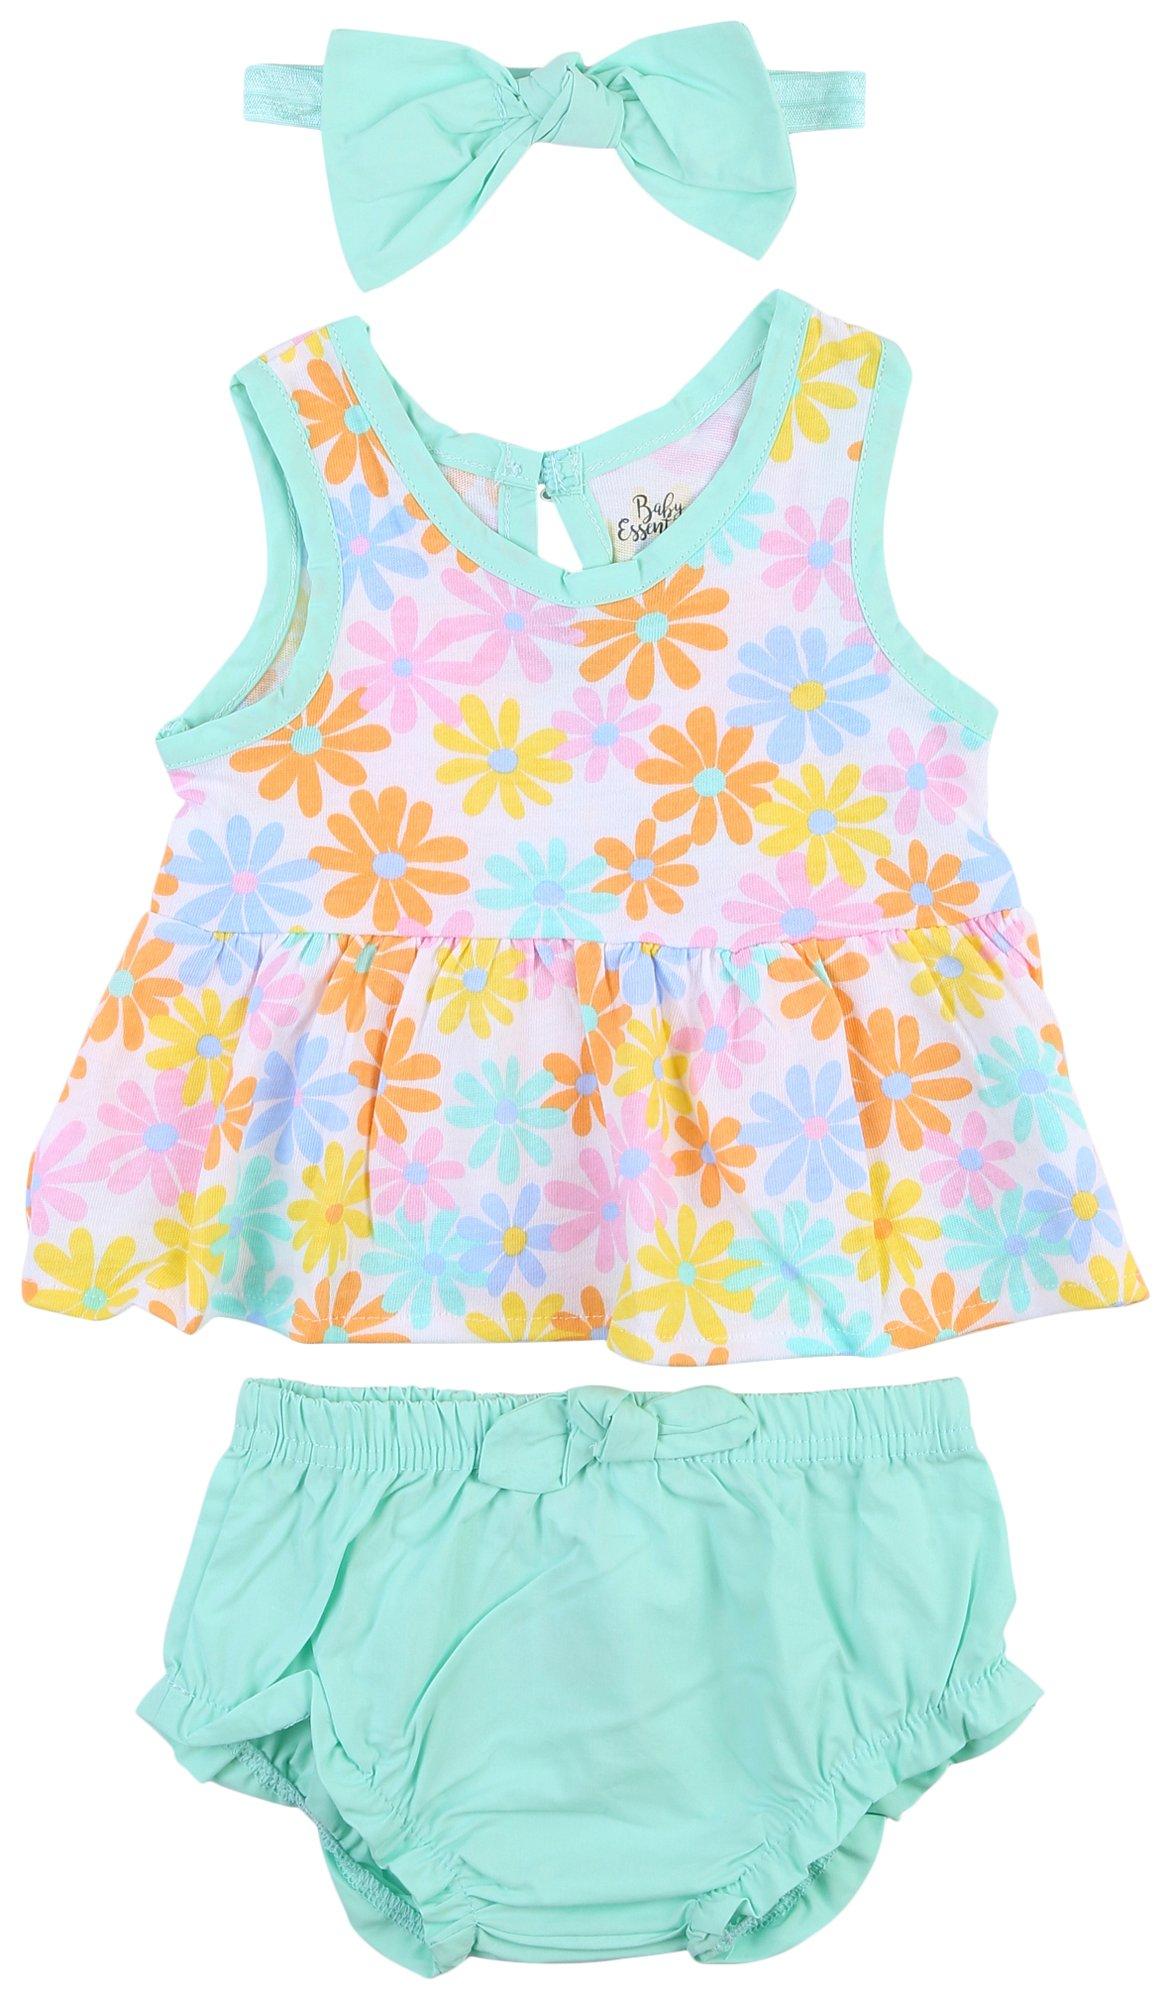 Baby Essentials Baby Girls 3-pc. Dress and Shorts Set